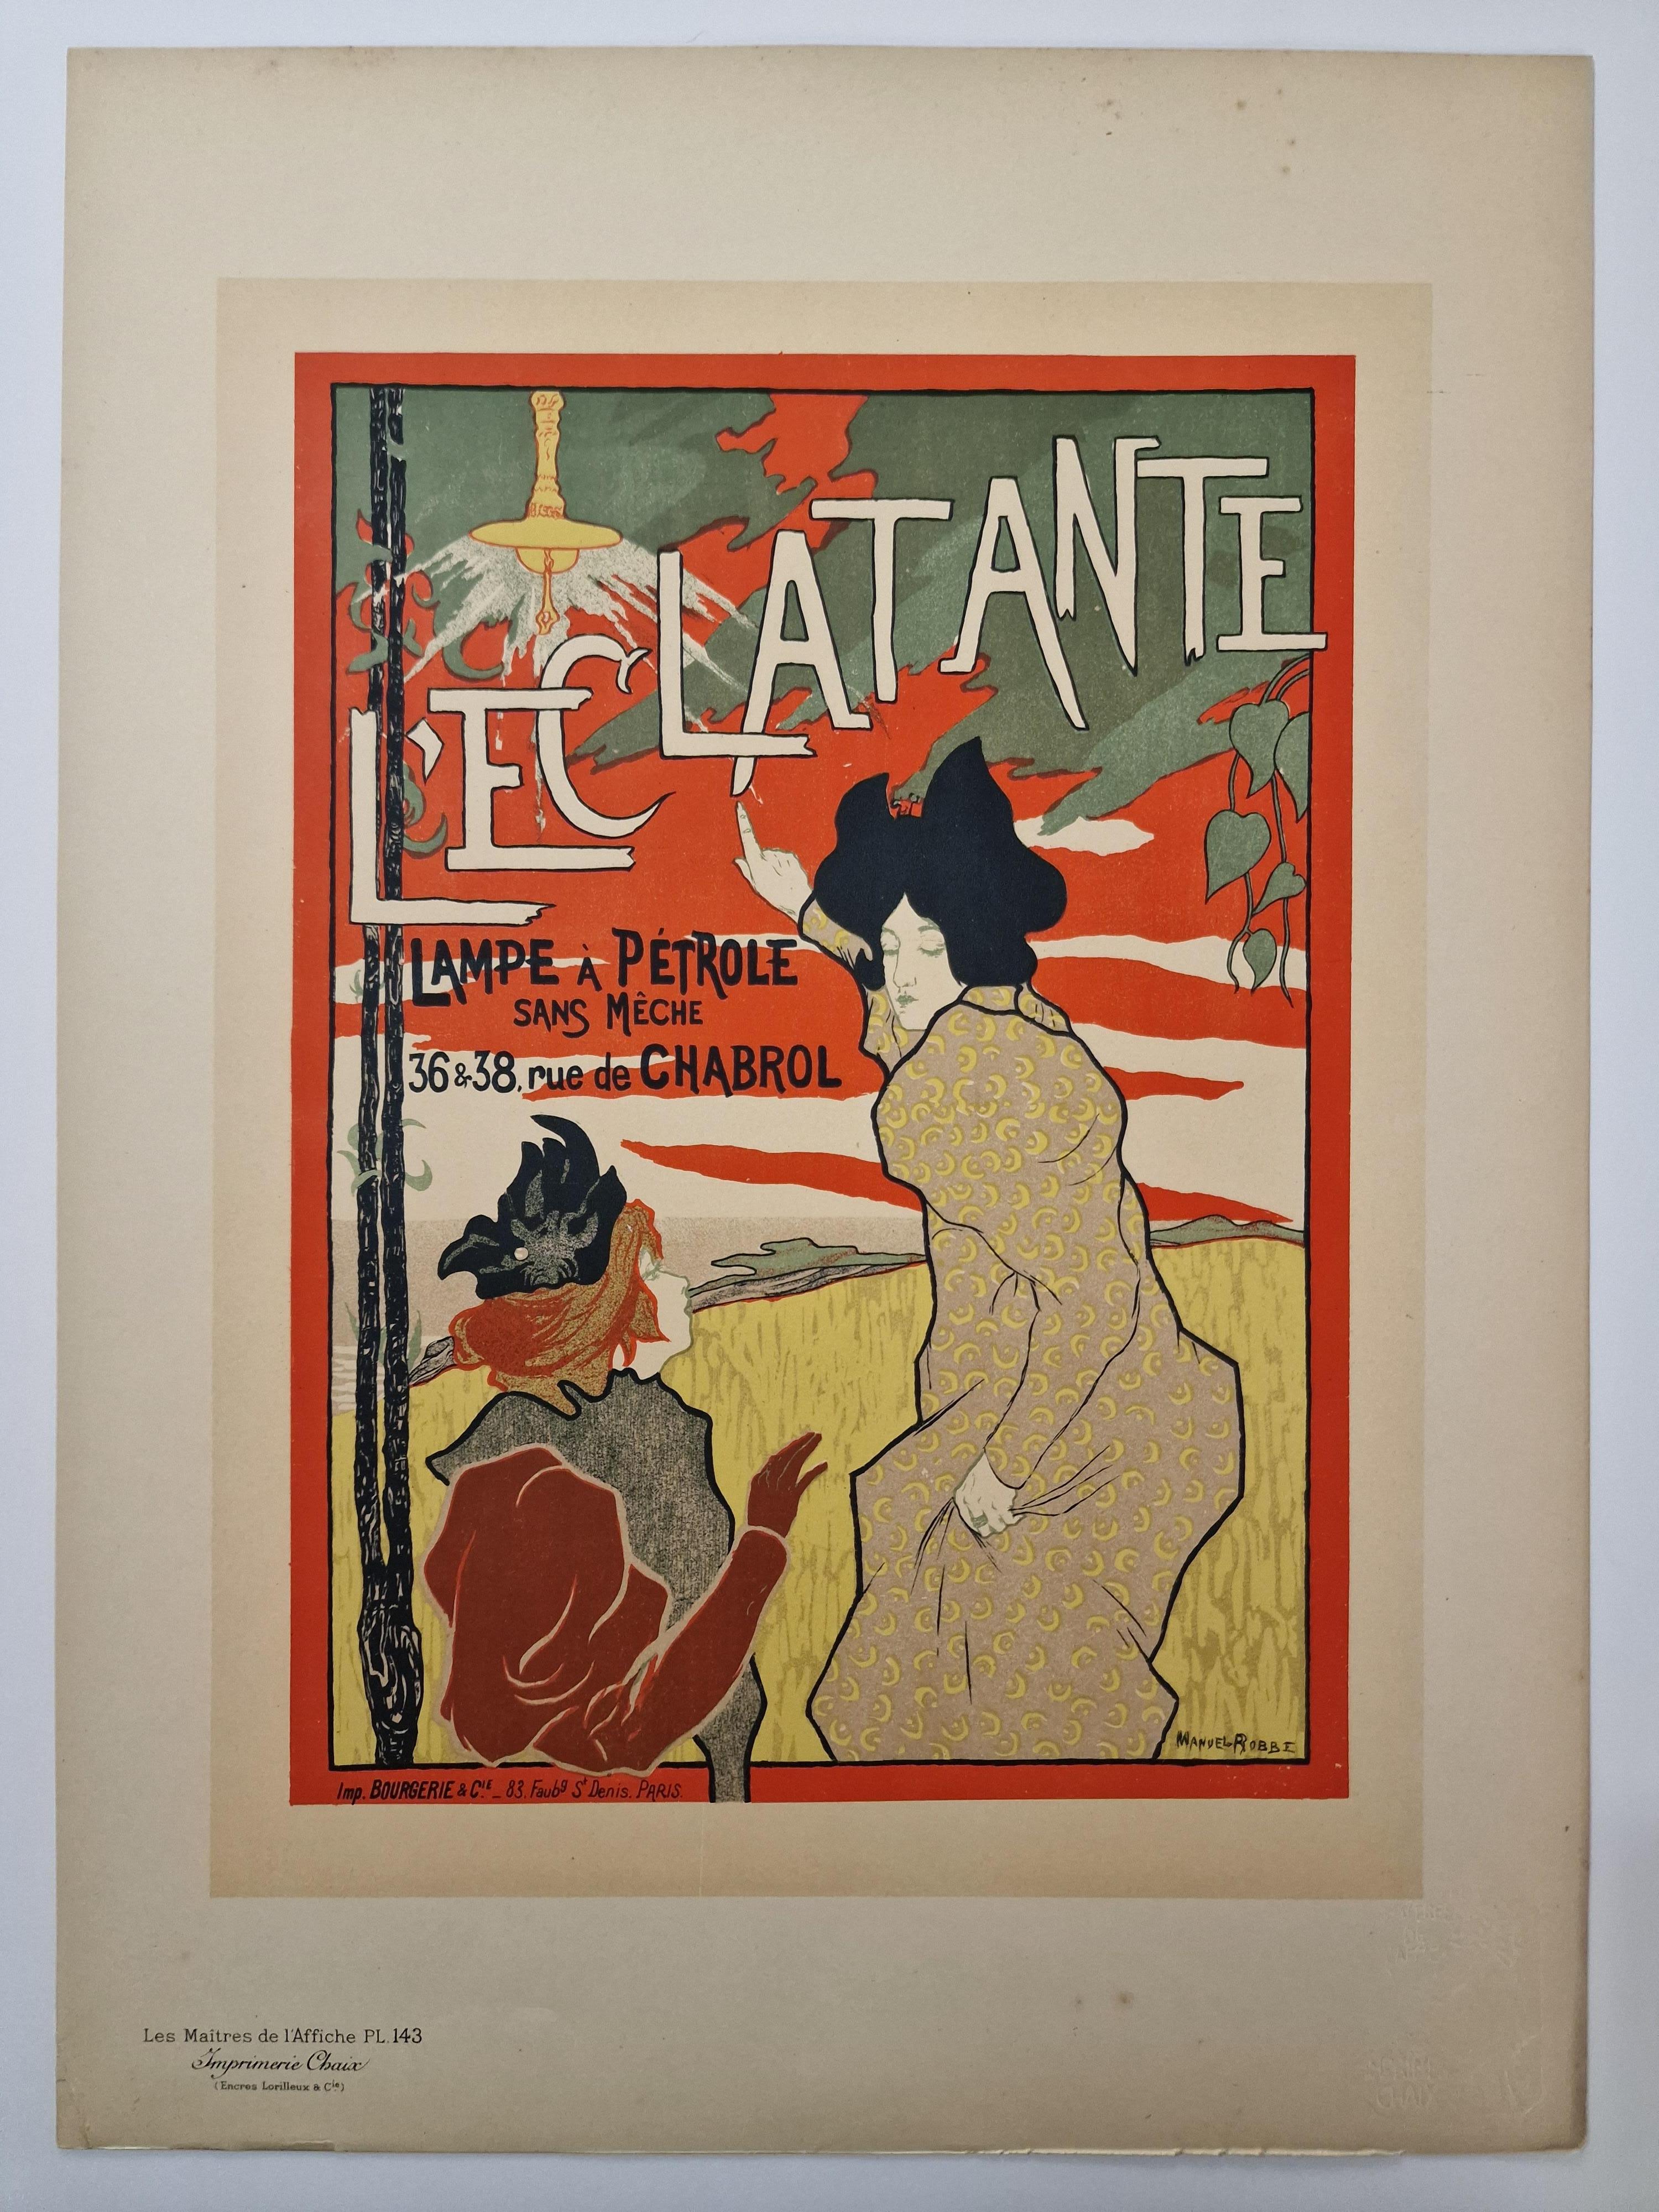 L'Eclatante - Print by Manuel Robbe